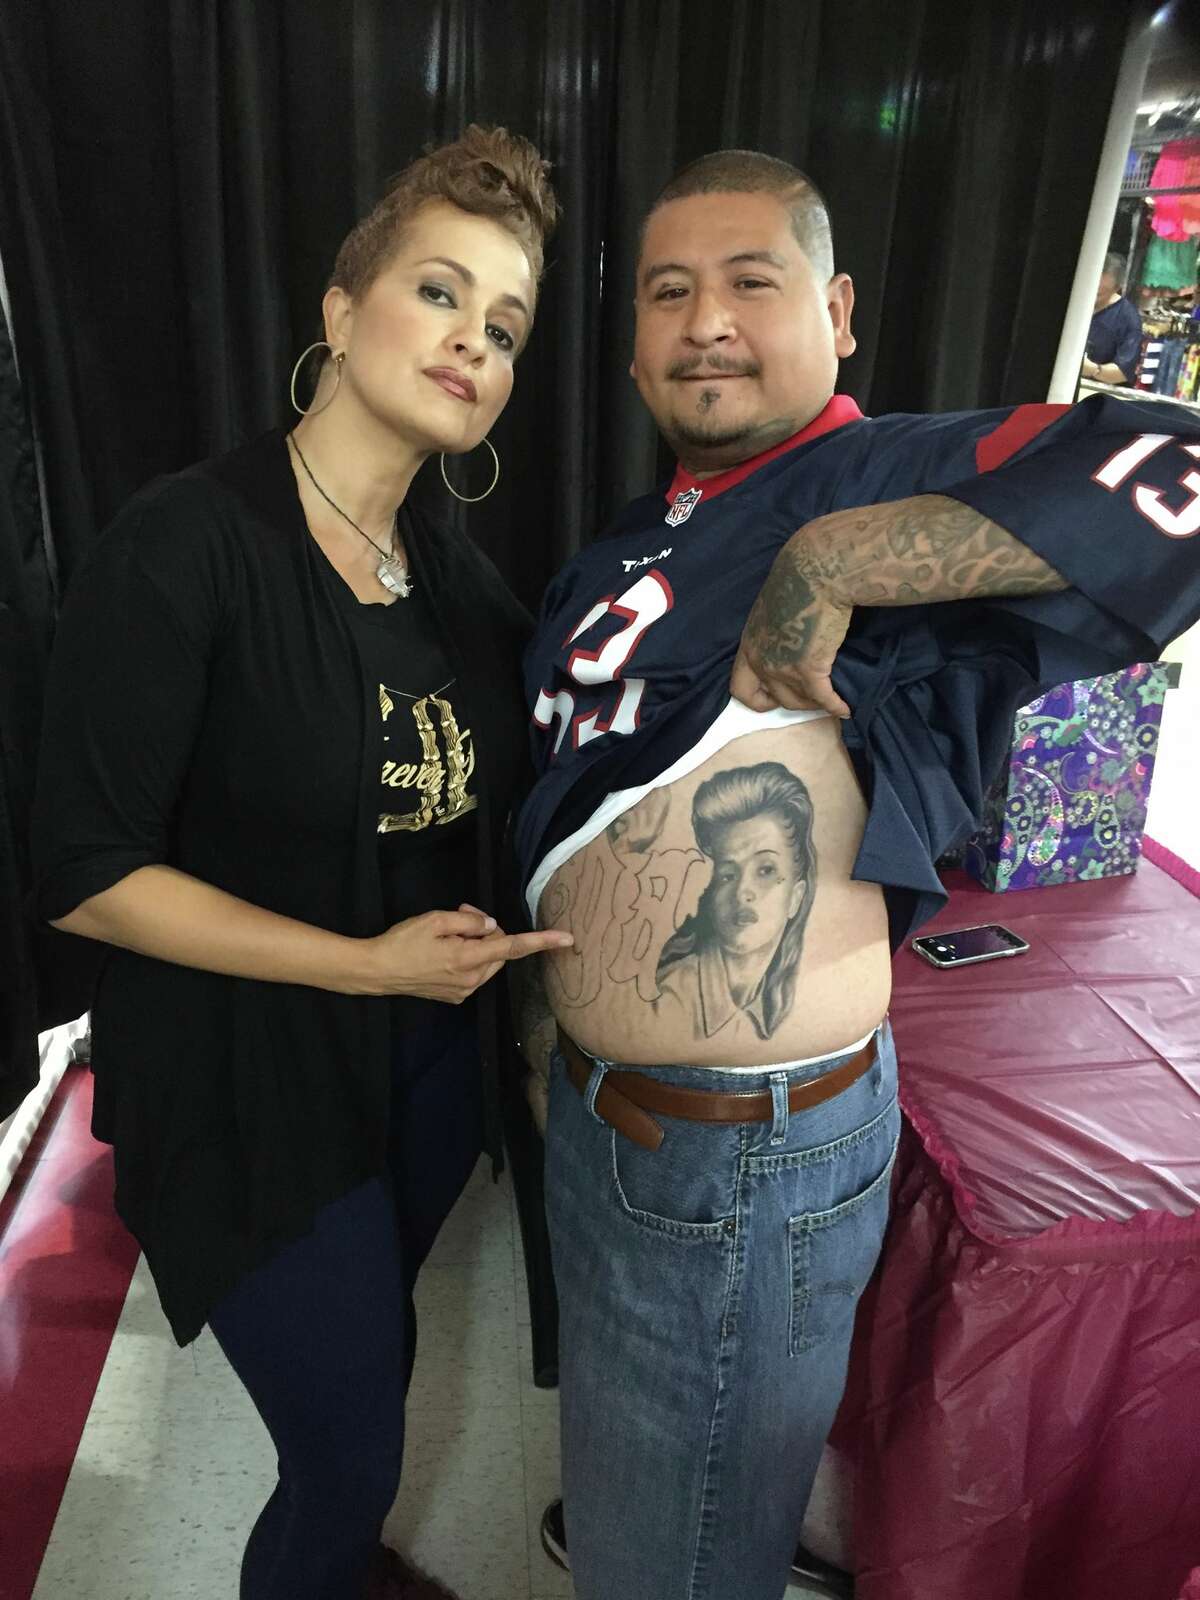 Angel Aviles with a fan who has a tattoo of her character, Sad Girl, from the film "Mi Vida Loca."